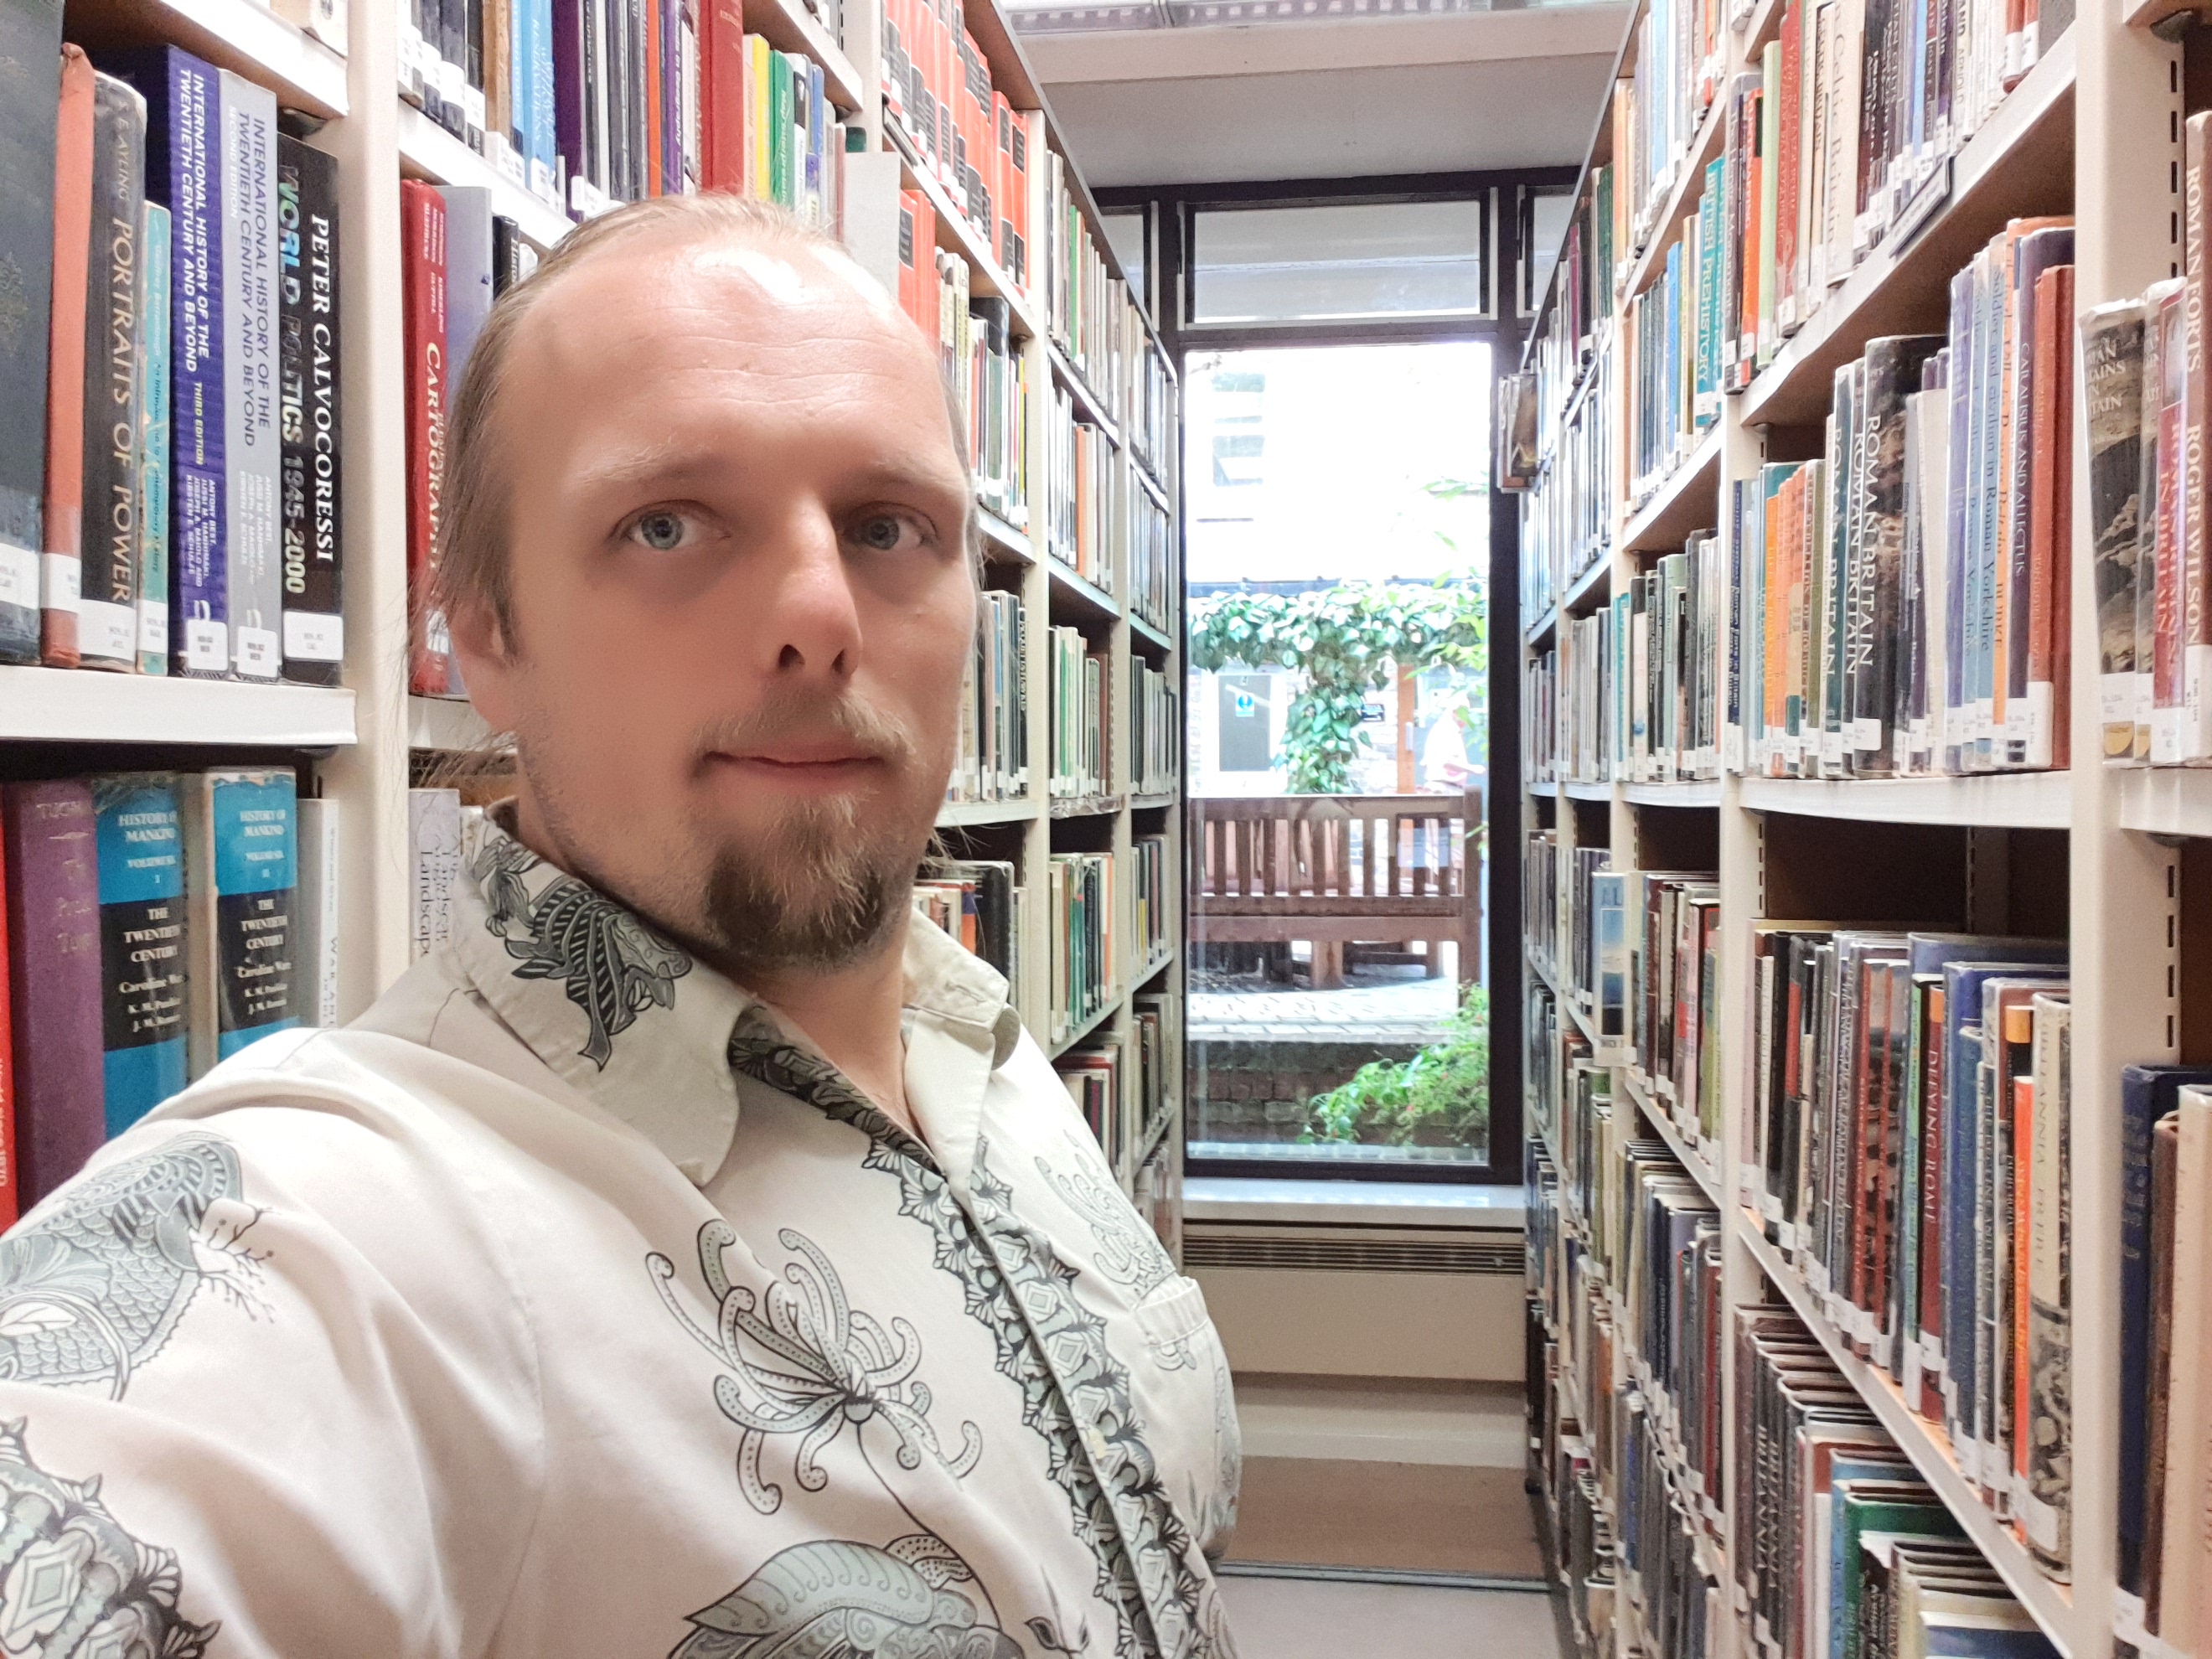 Dan in the Rewley Library at the University of Oxford.